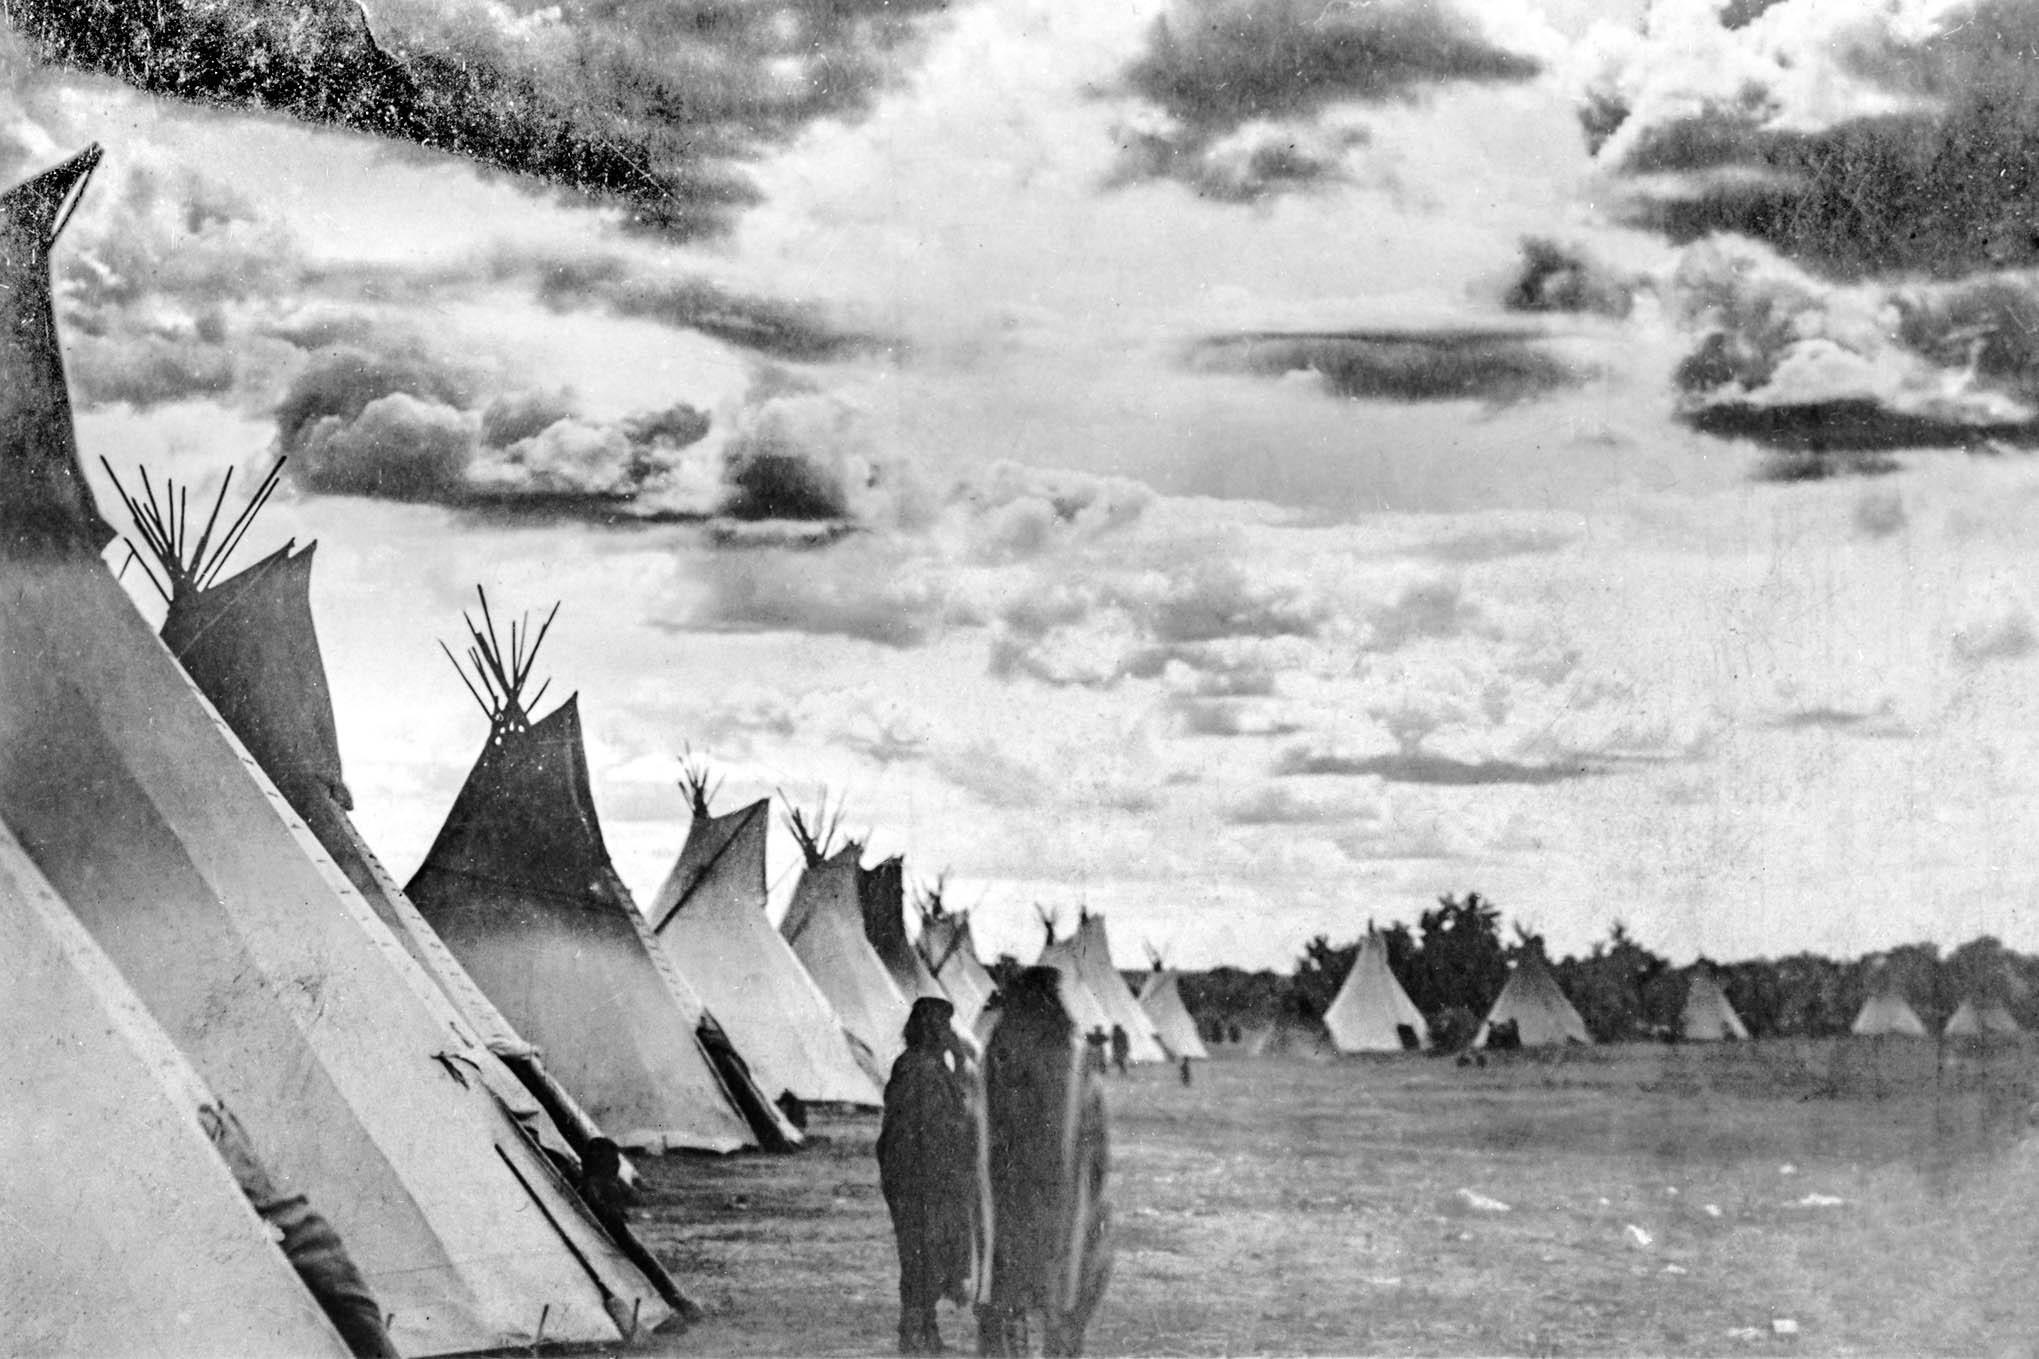 in the 1500s what changed the ways of life for native americans forever?